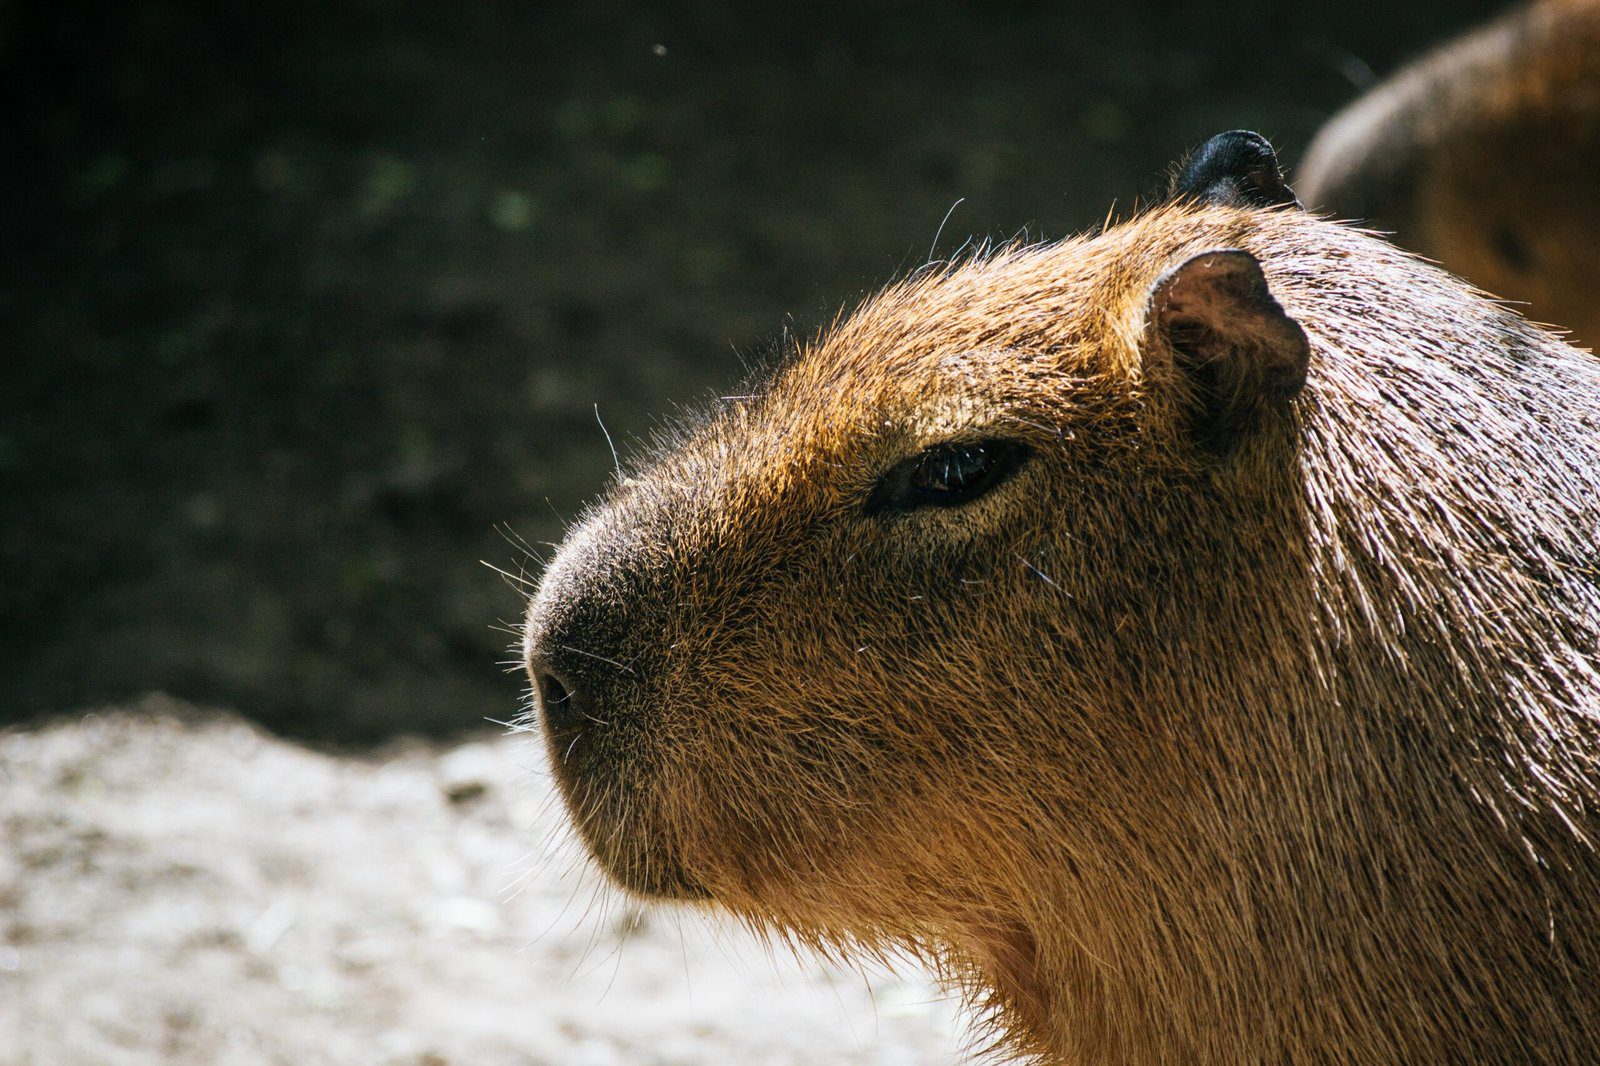 Countries that are home to capybaras